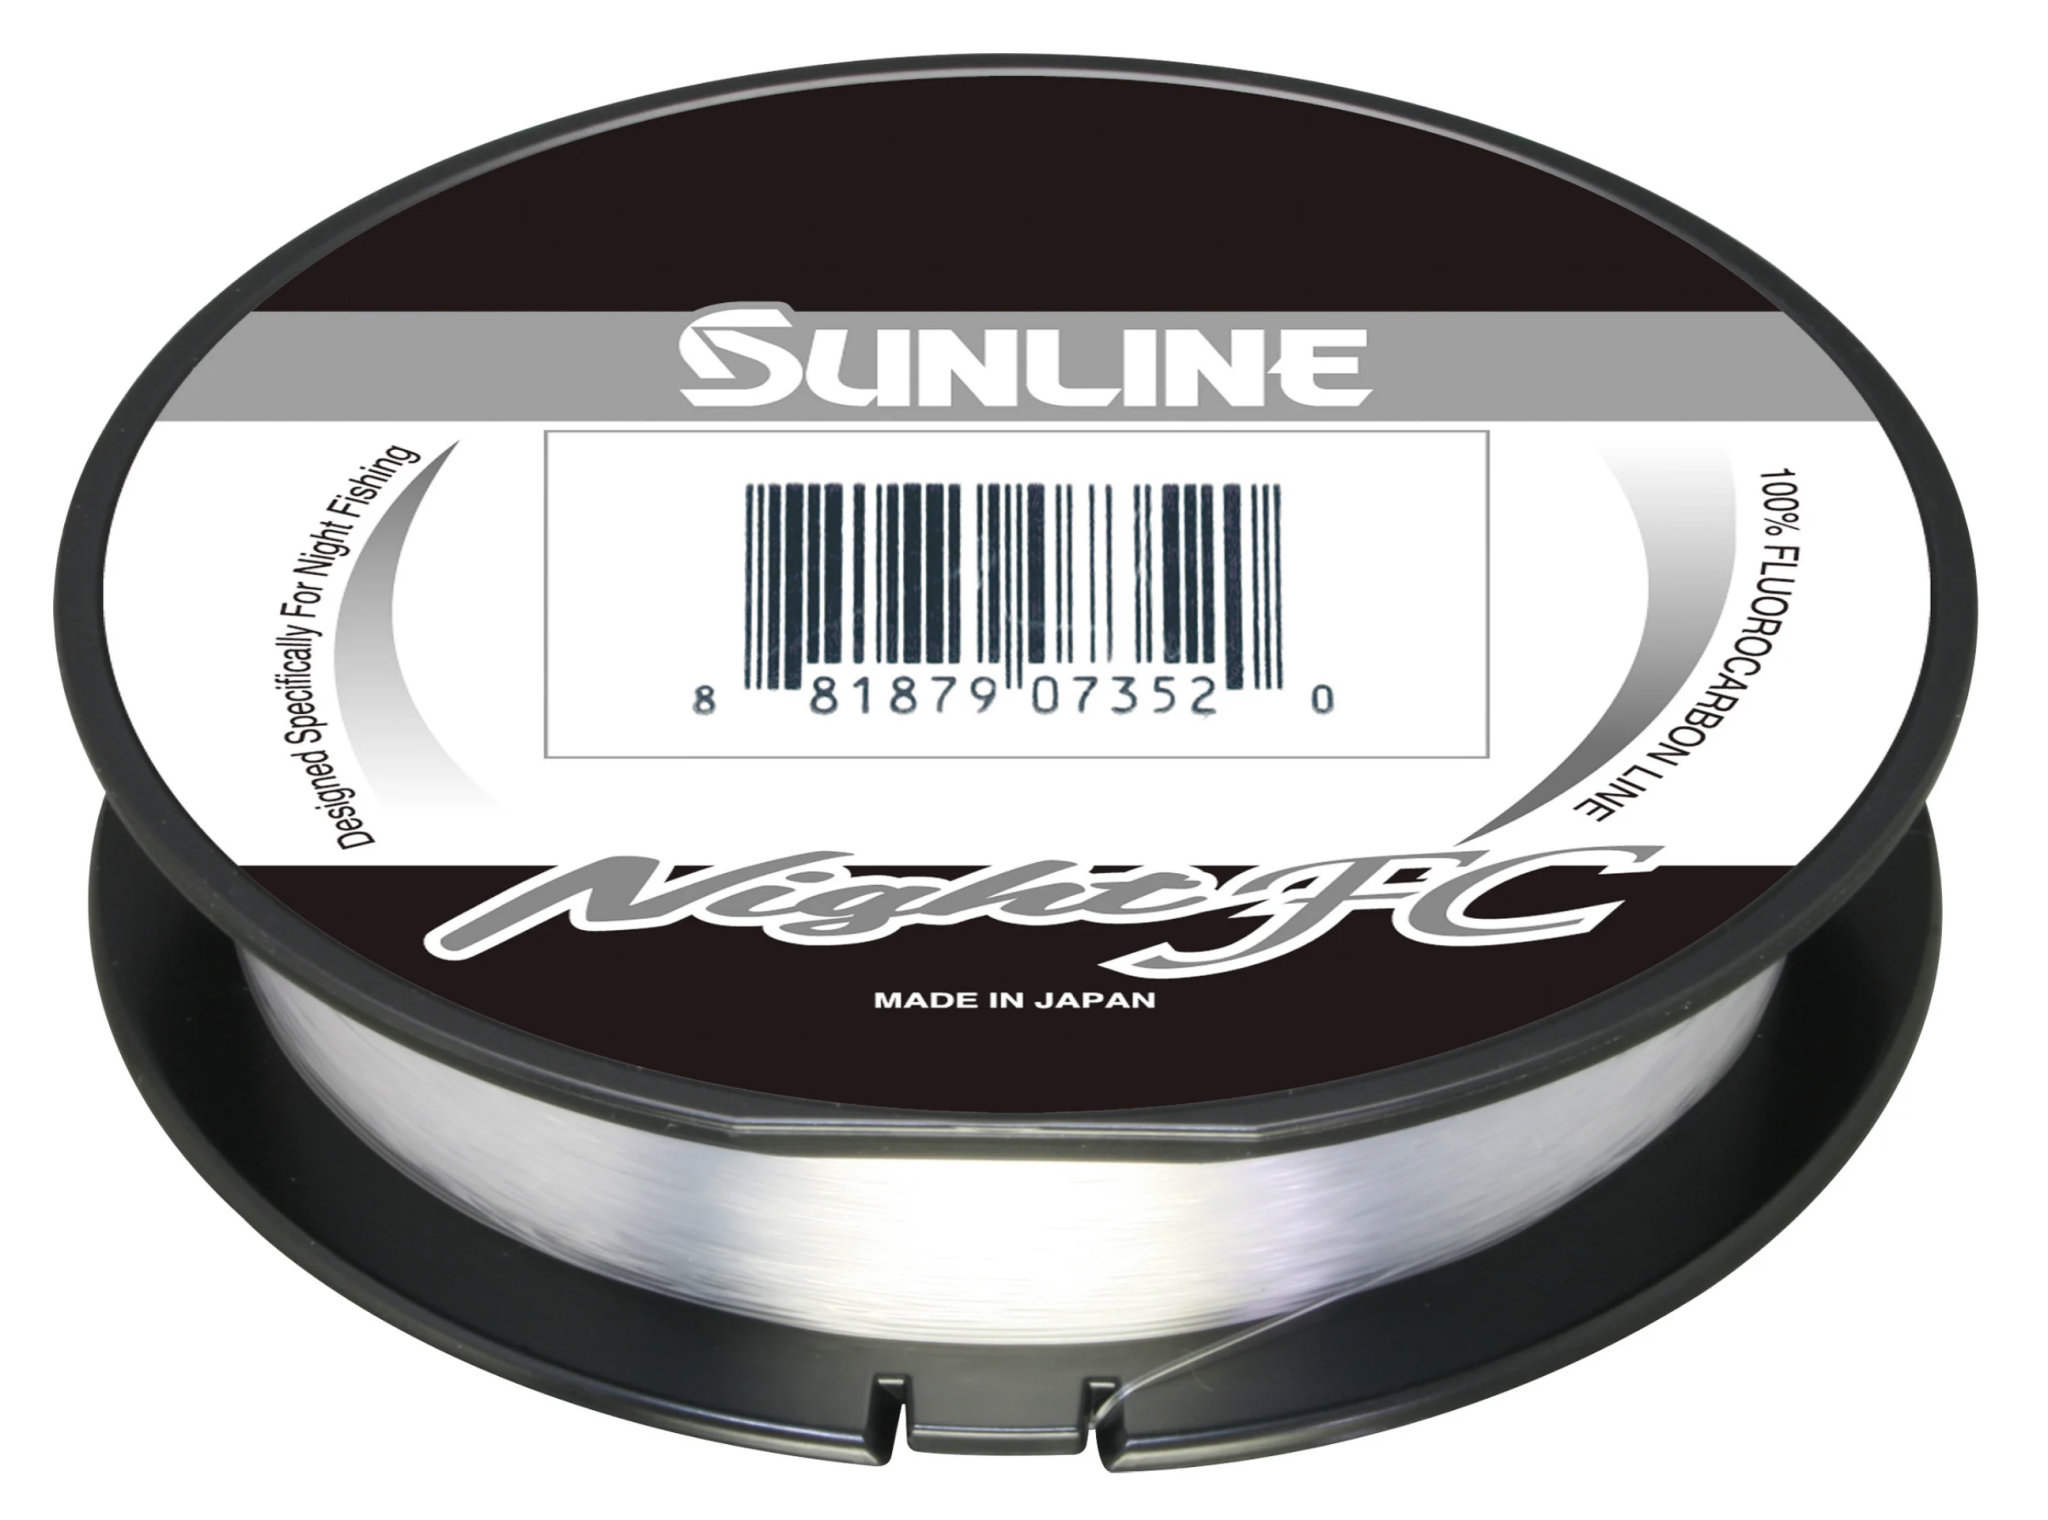 Sunline Night FC - Modern Outdoor Tackle